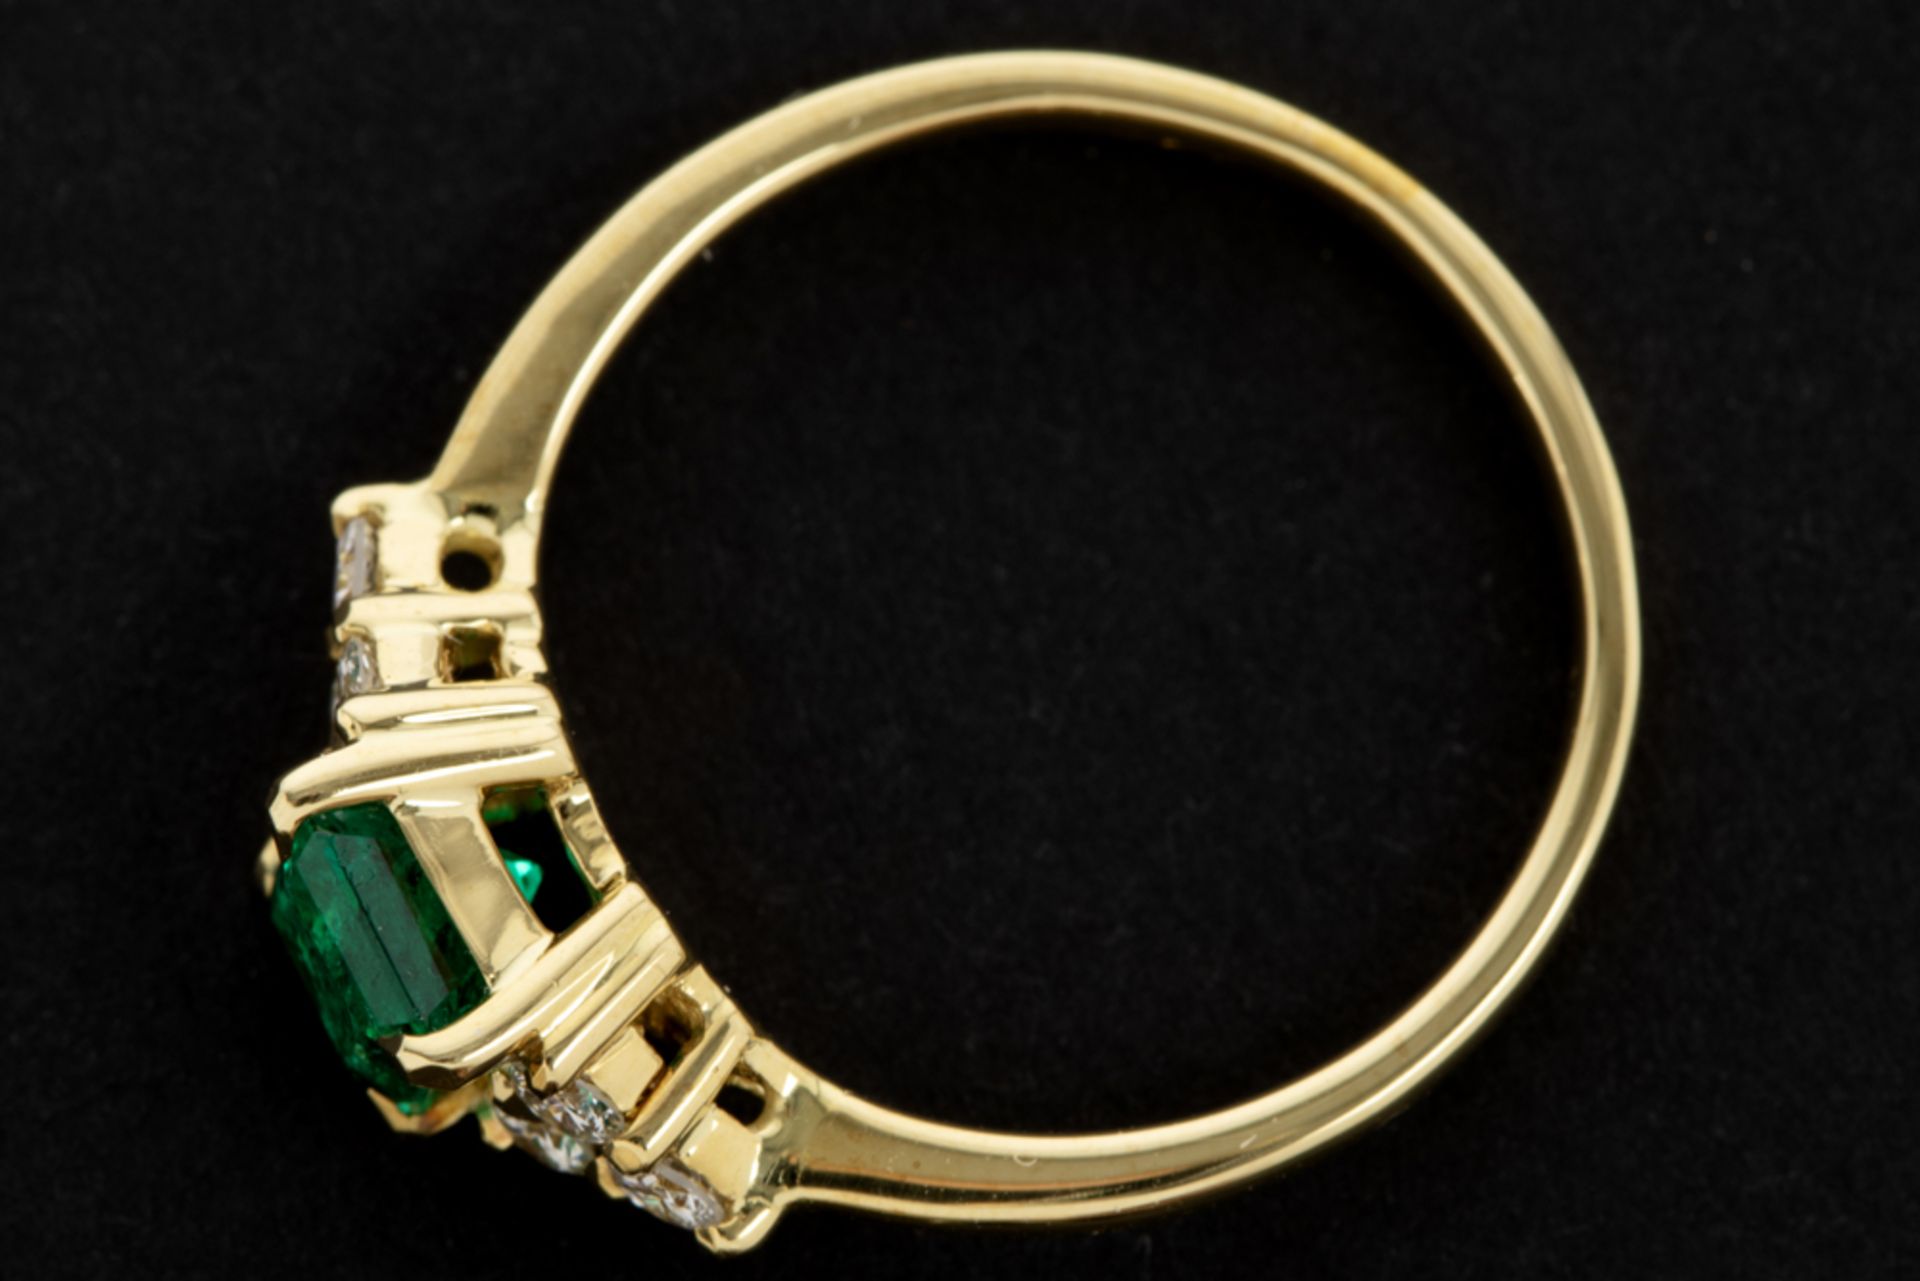 ring in yellow gold (18 carat) with a 0,80 carat "transparent vivid green" emerald and 0,22 carat of - Image 2 of 3